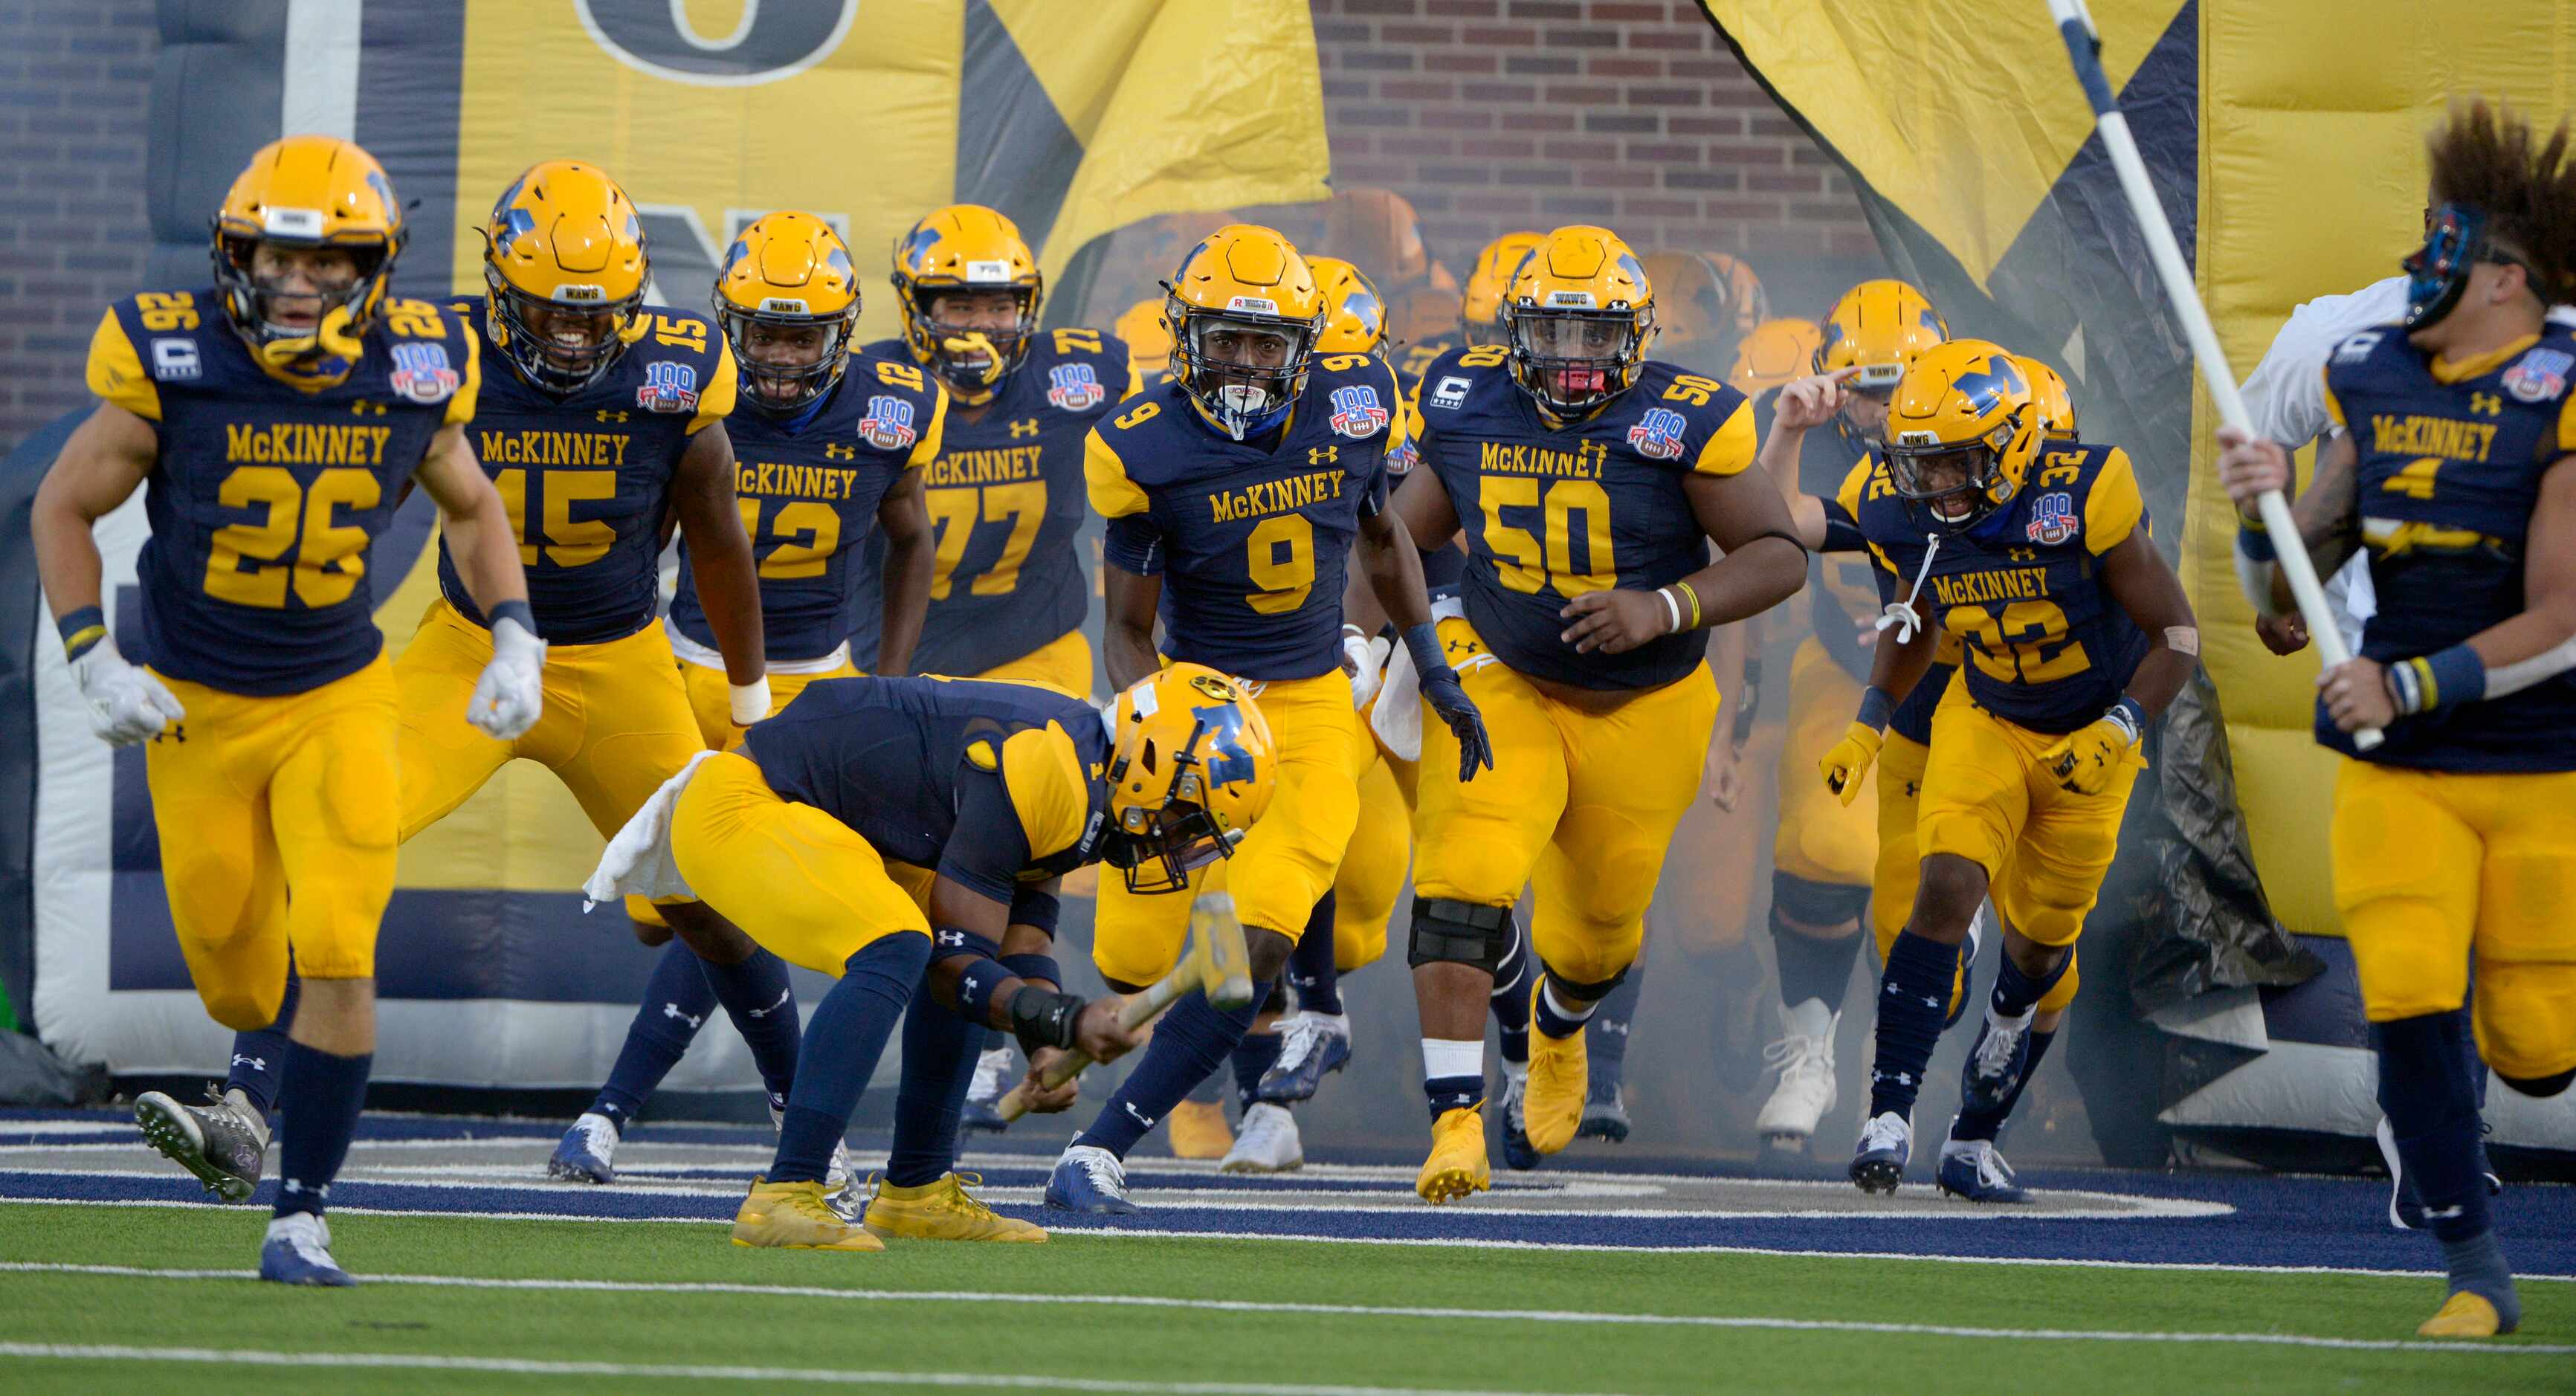 McKinney players run onto the field before a high school football game between Plano and...